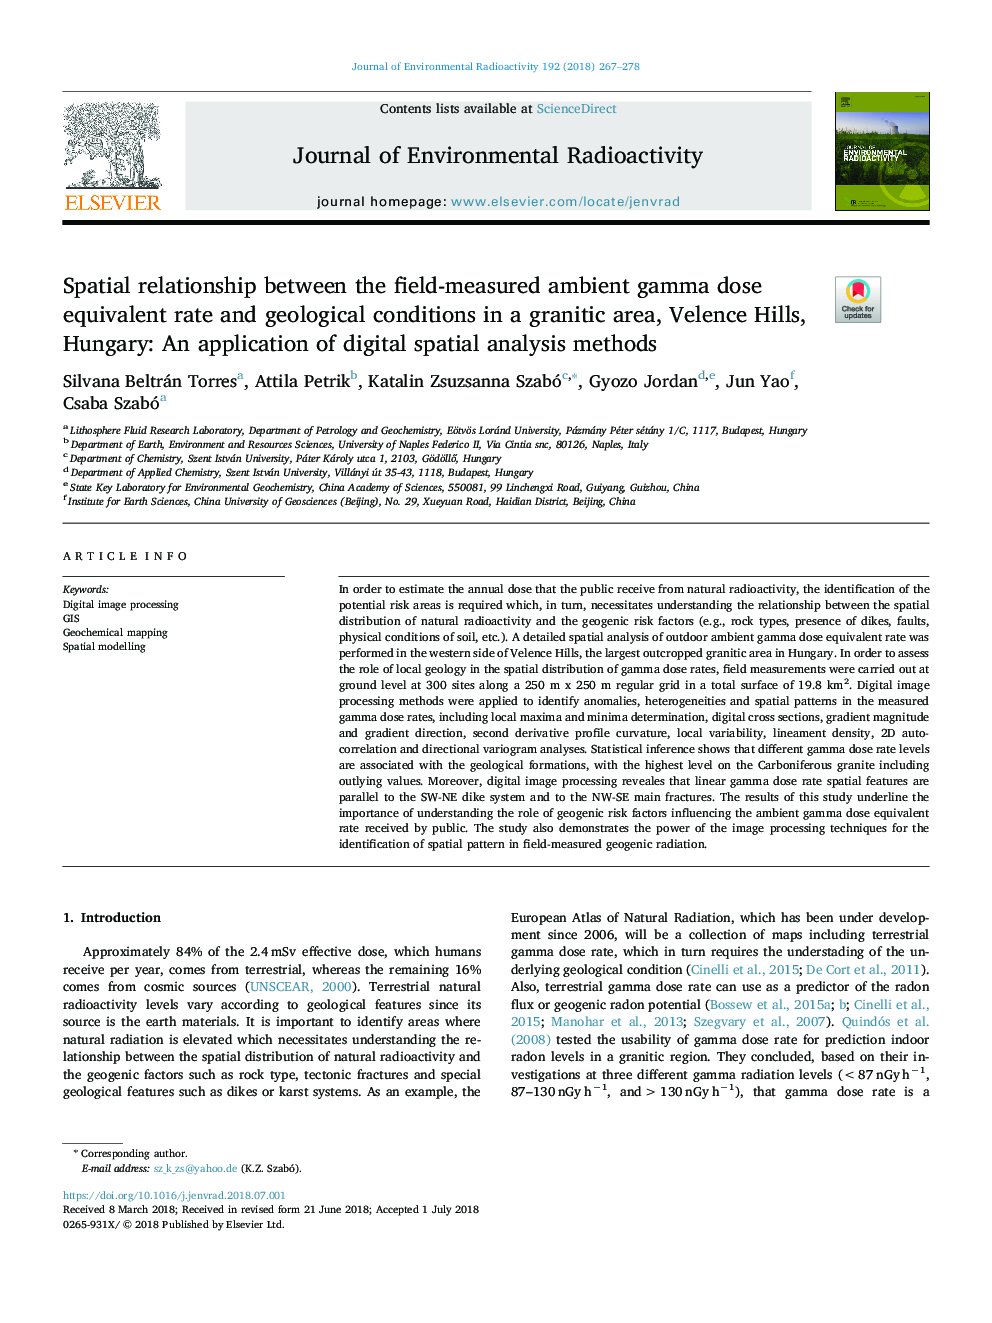 Spatial relationship between the field-measured ambient gamma dose equivalent rate and geological conditions in a granitic area, Velence Hills, Hungary: An application of digital spatial analysis methods